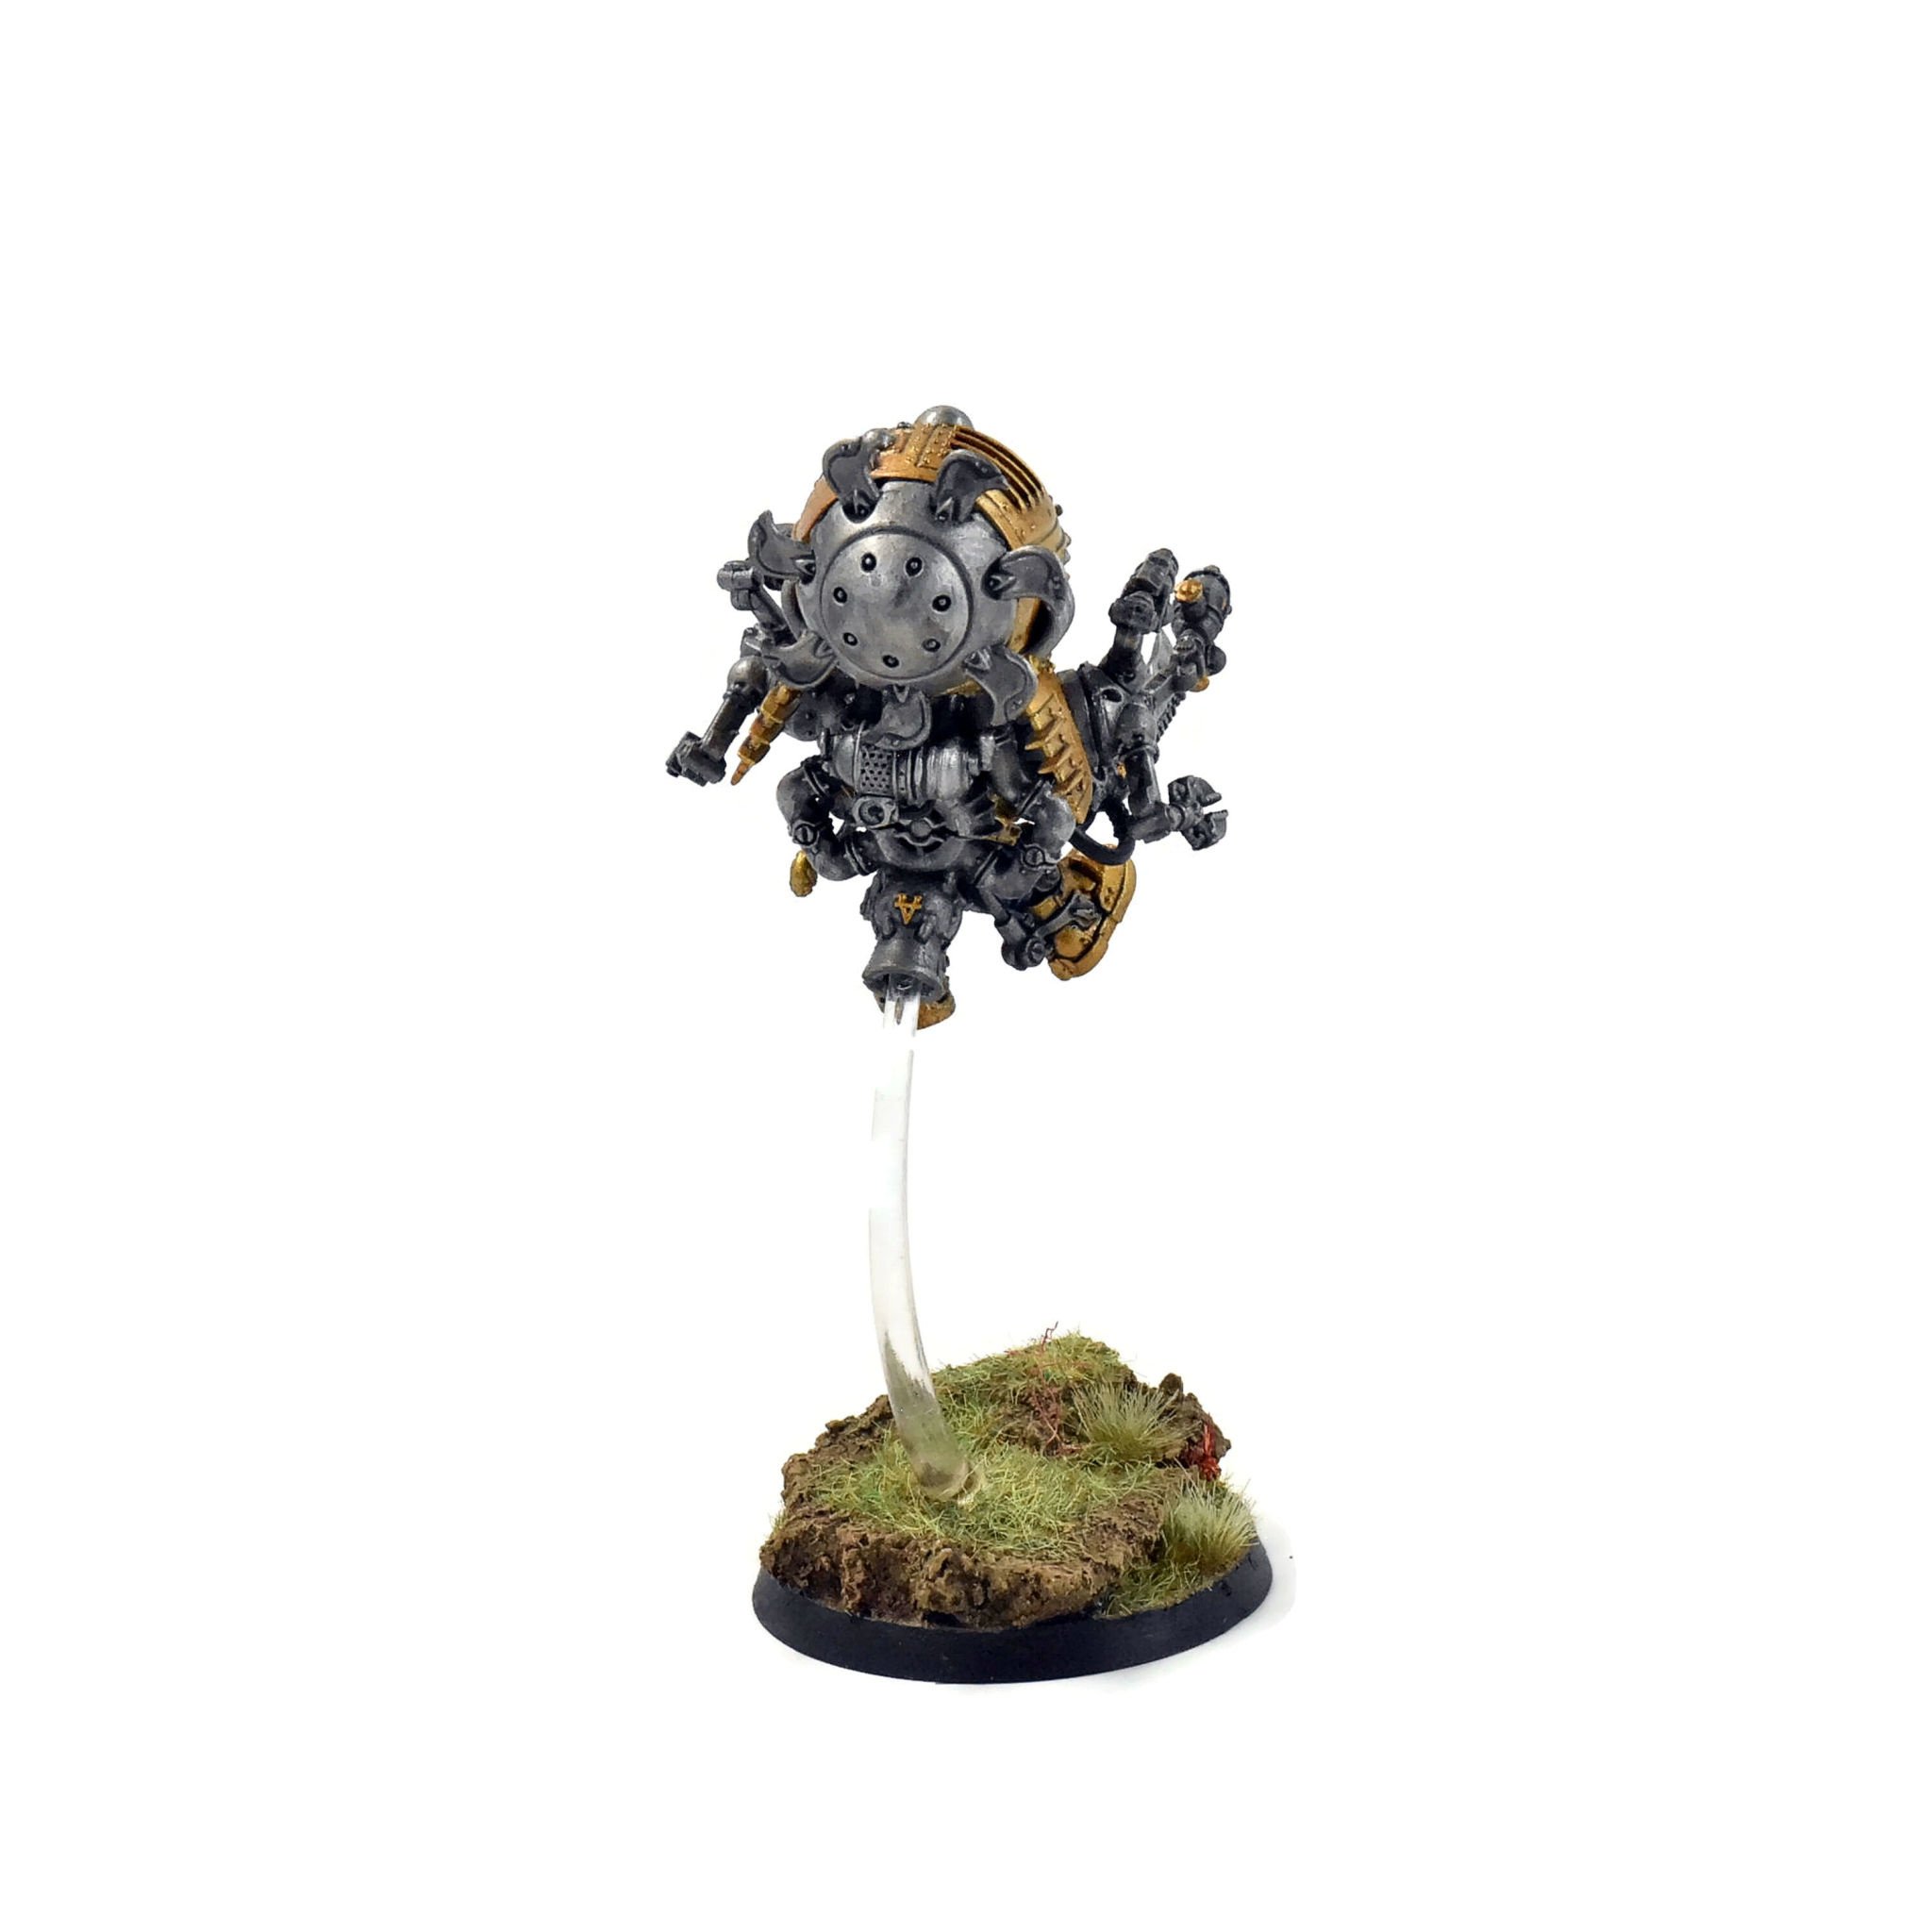 KHARADRON OVERLORDS Endrinmaster with Dirigible Suit #1 PRO PAINTED Sigmar